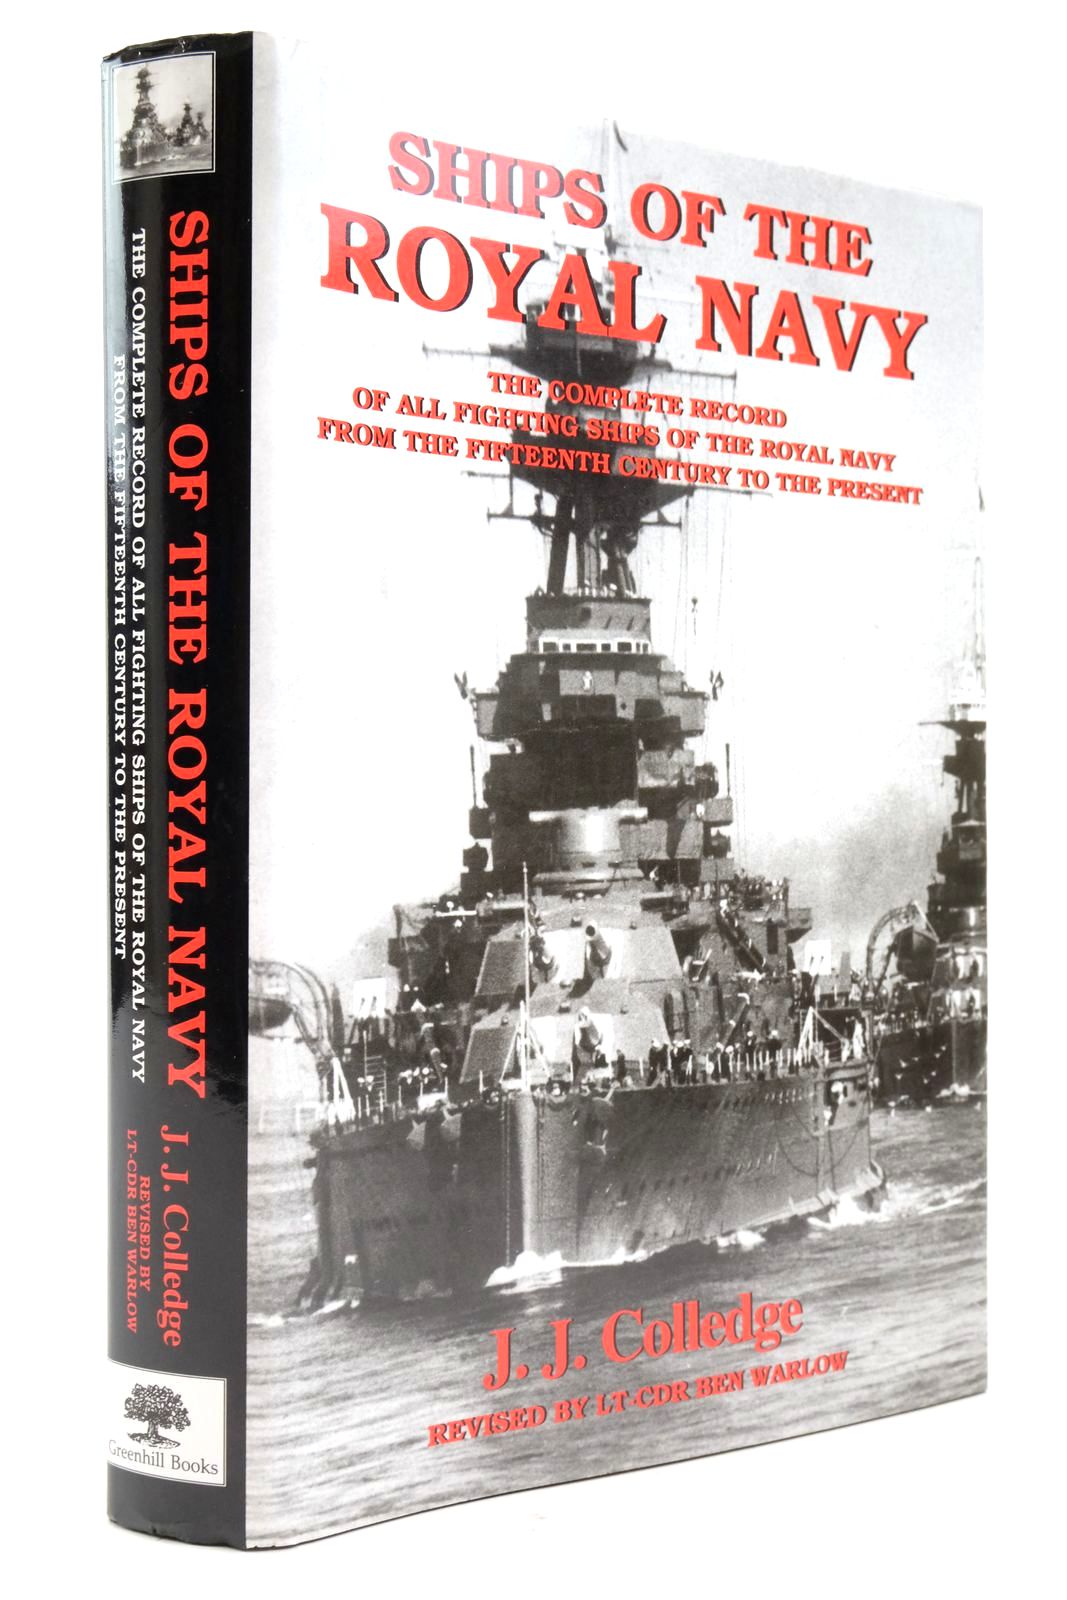 Photo of SHIPS OF THE ROYAL NAVY written by Colledge, J.J. Warlow, Ben published by Greenhill Books (STOCK CODE: 2138359)  for sale by Stella & Rose's Books